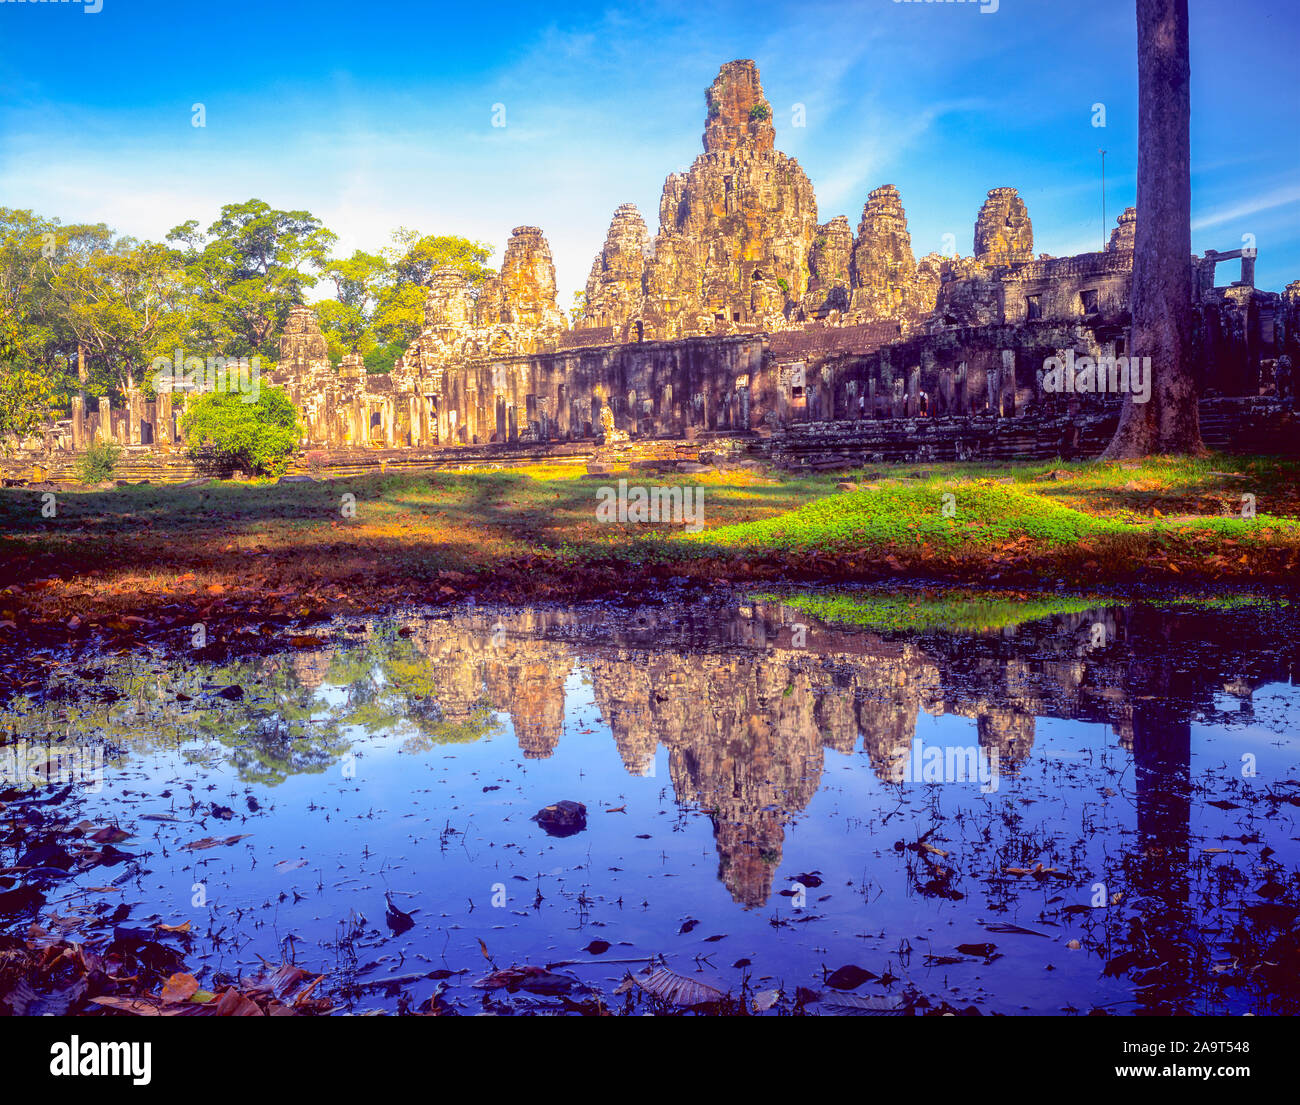 Bayon Temple relections, Angkor Watt Acheological Park, Cambodia, City of Angkor Thom Built 100-1200 AD KHmer Culture ruins in SE Asia jungle- Stock Photo